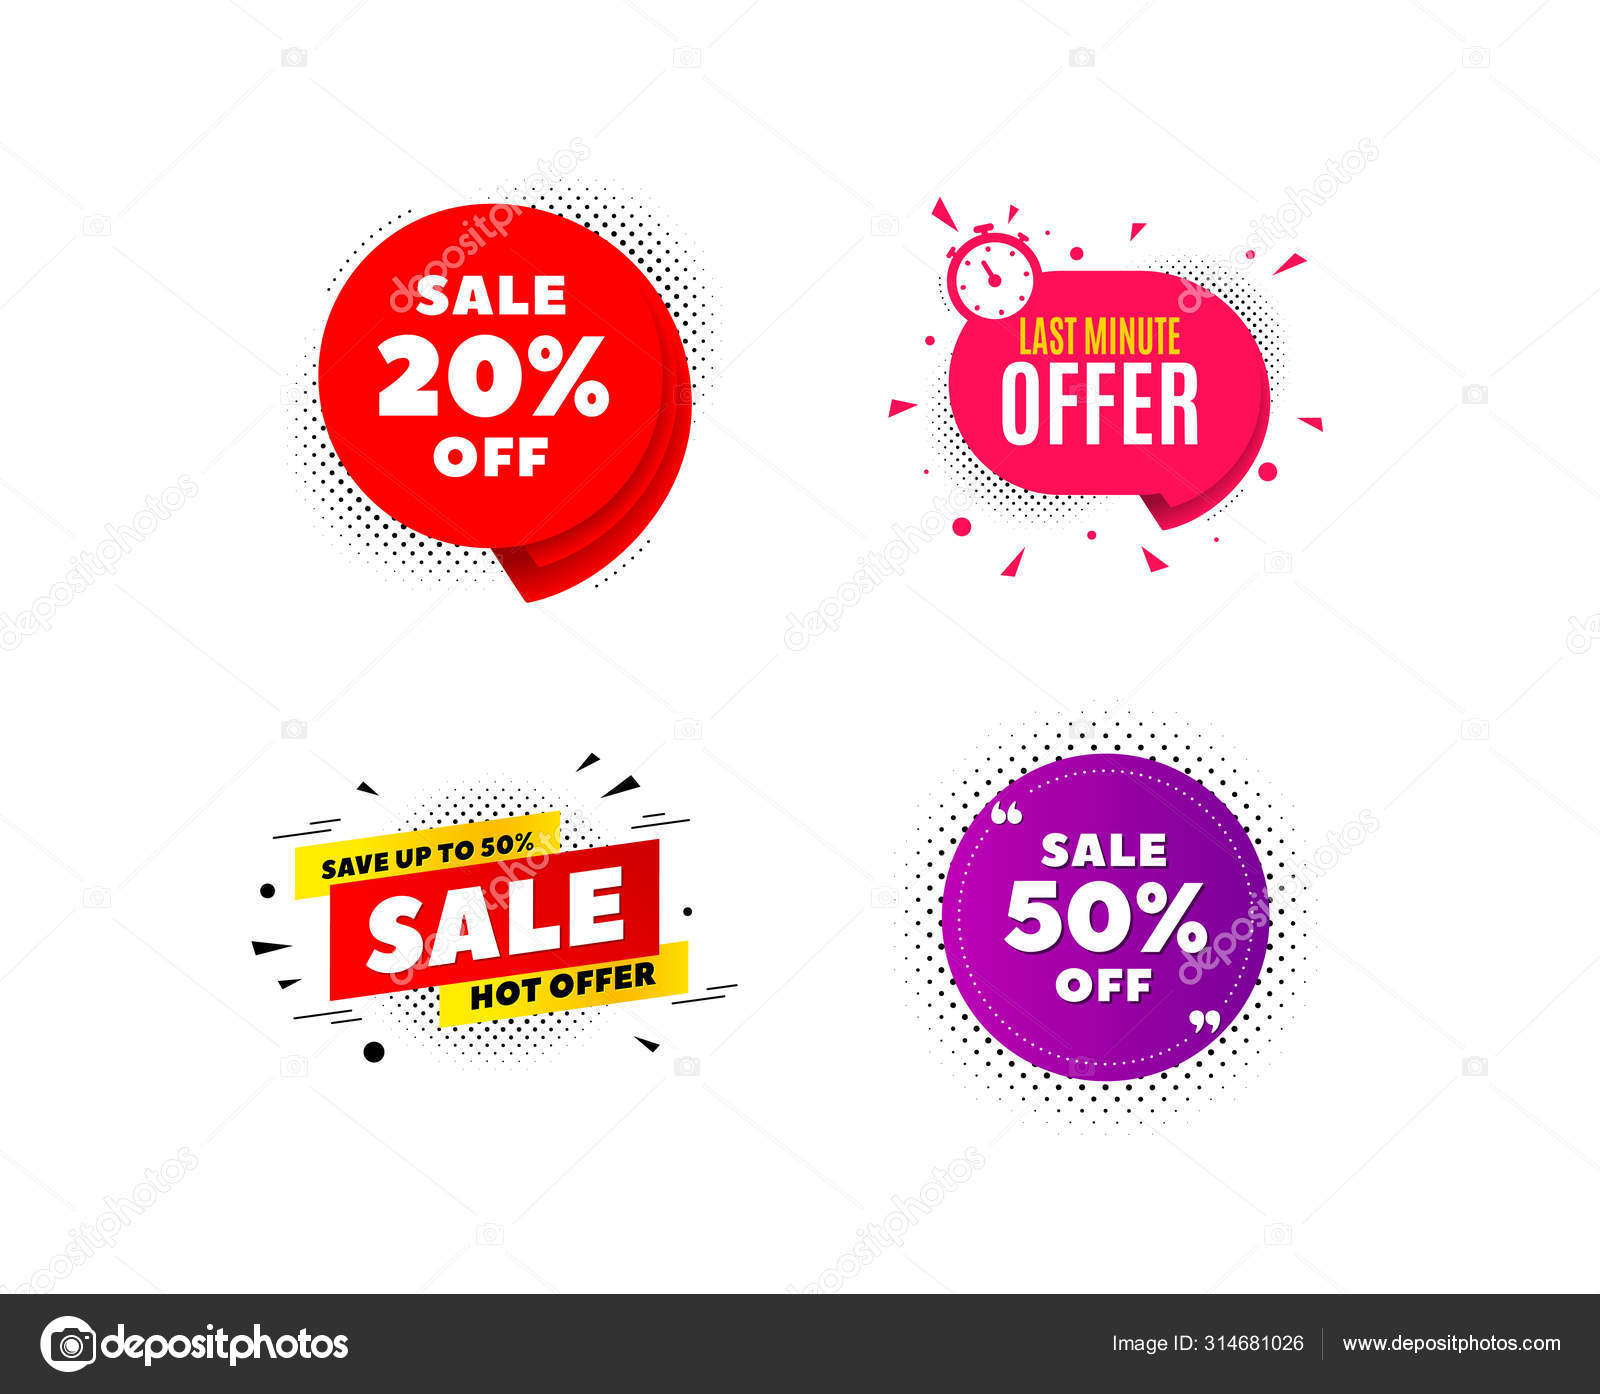 50 percent off sale banner template. Shopping half price discount